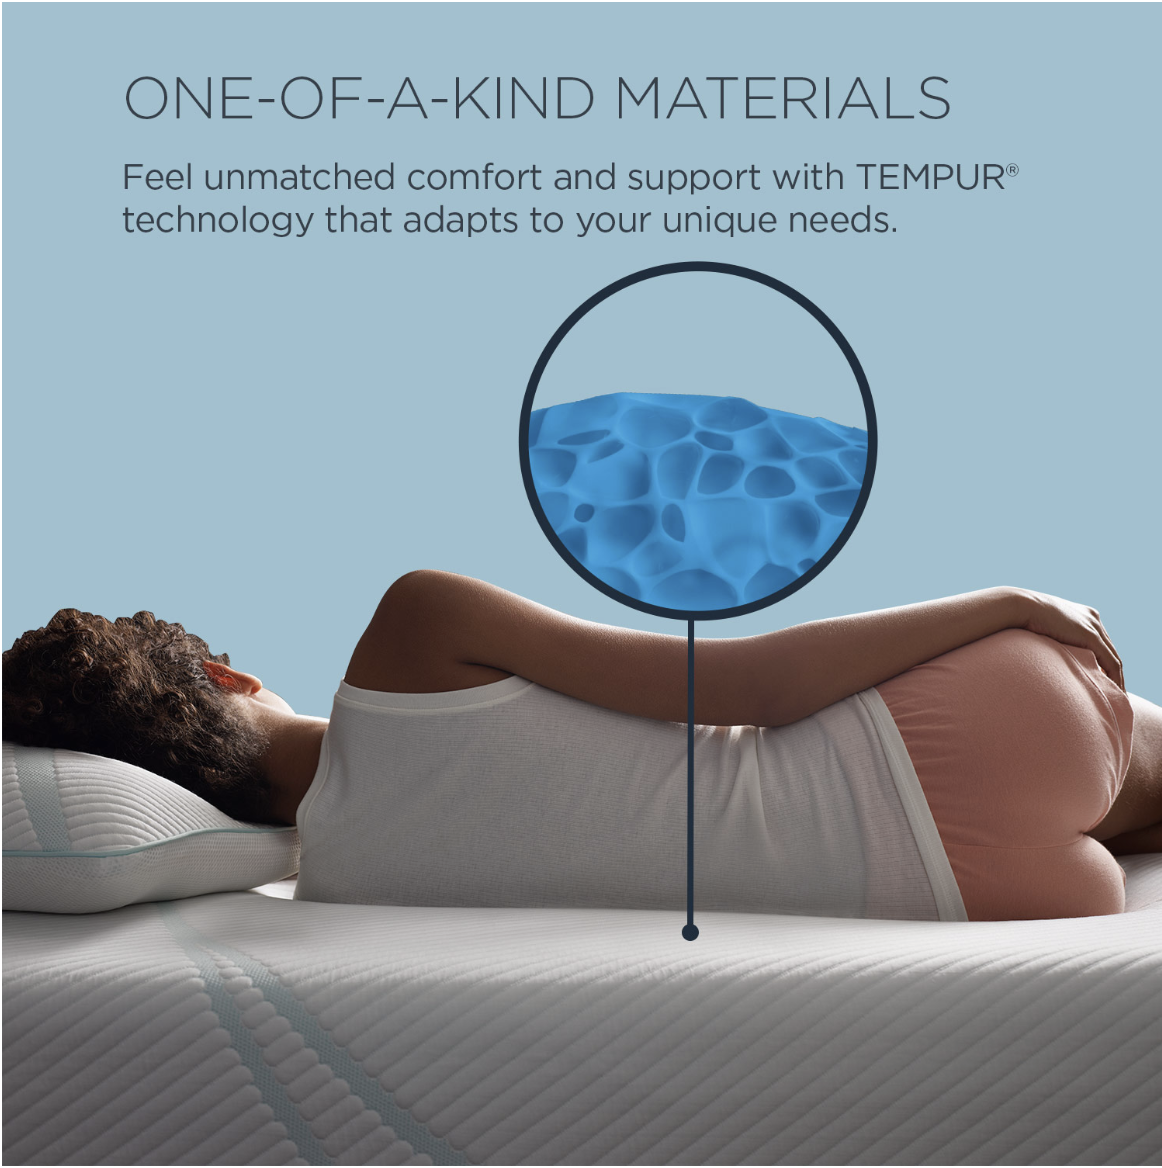 One-of-a-kind materials - Feel unmatched comfort and support with TEMPUR technology that adapts to your unique needs - Shop Tempur-Pedic